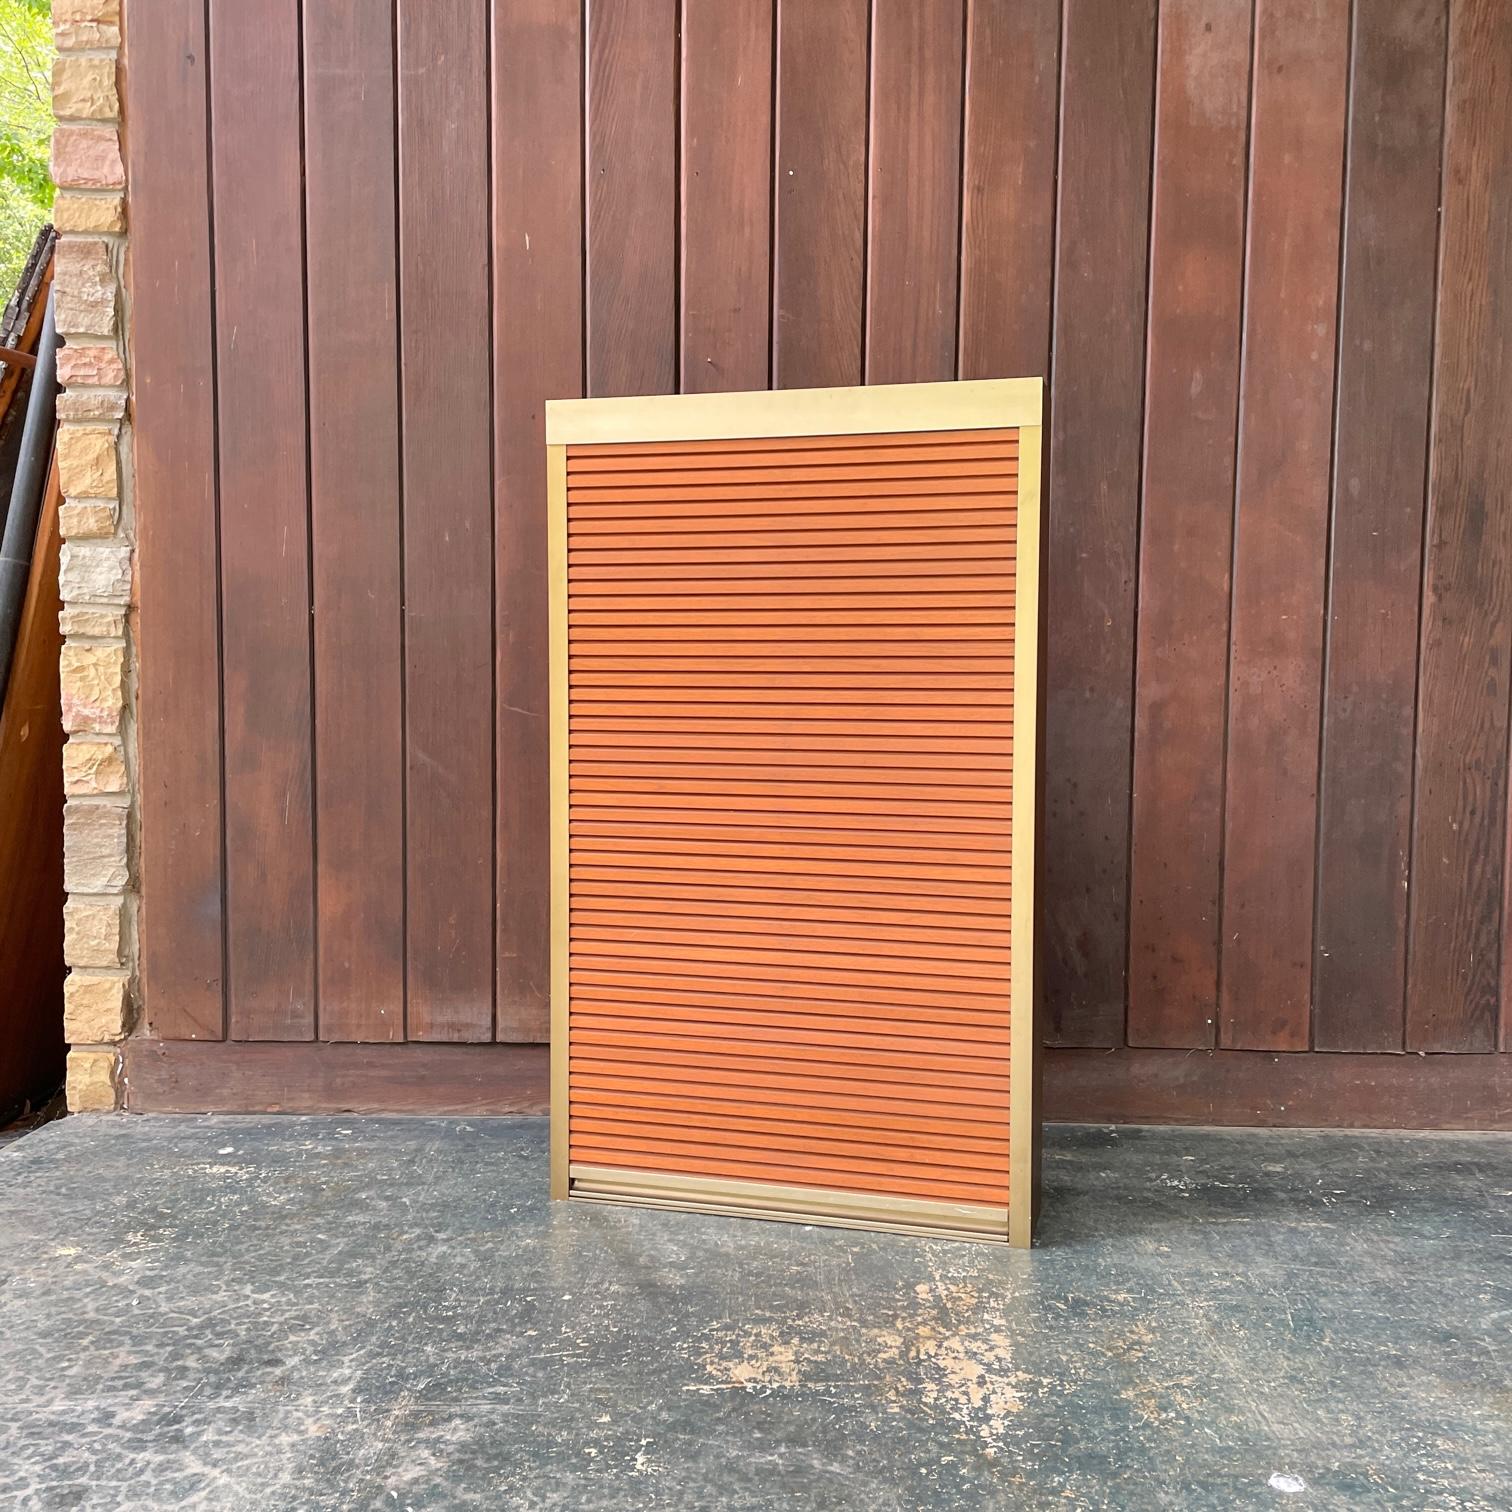 Super cool and compact anodized bronzed aluminum box with vertically retractable door.  Clean and minimal.  Taken off the wall from a Washington DC Georgetown Estate.  Door works well and comes with the wall-mounting bar. 

In decent cosmetic